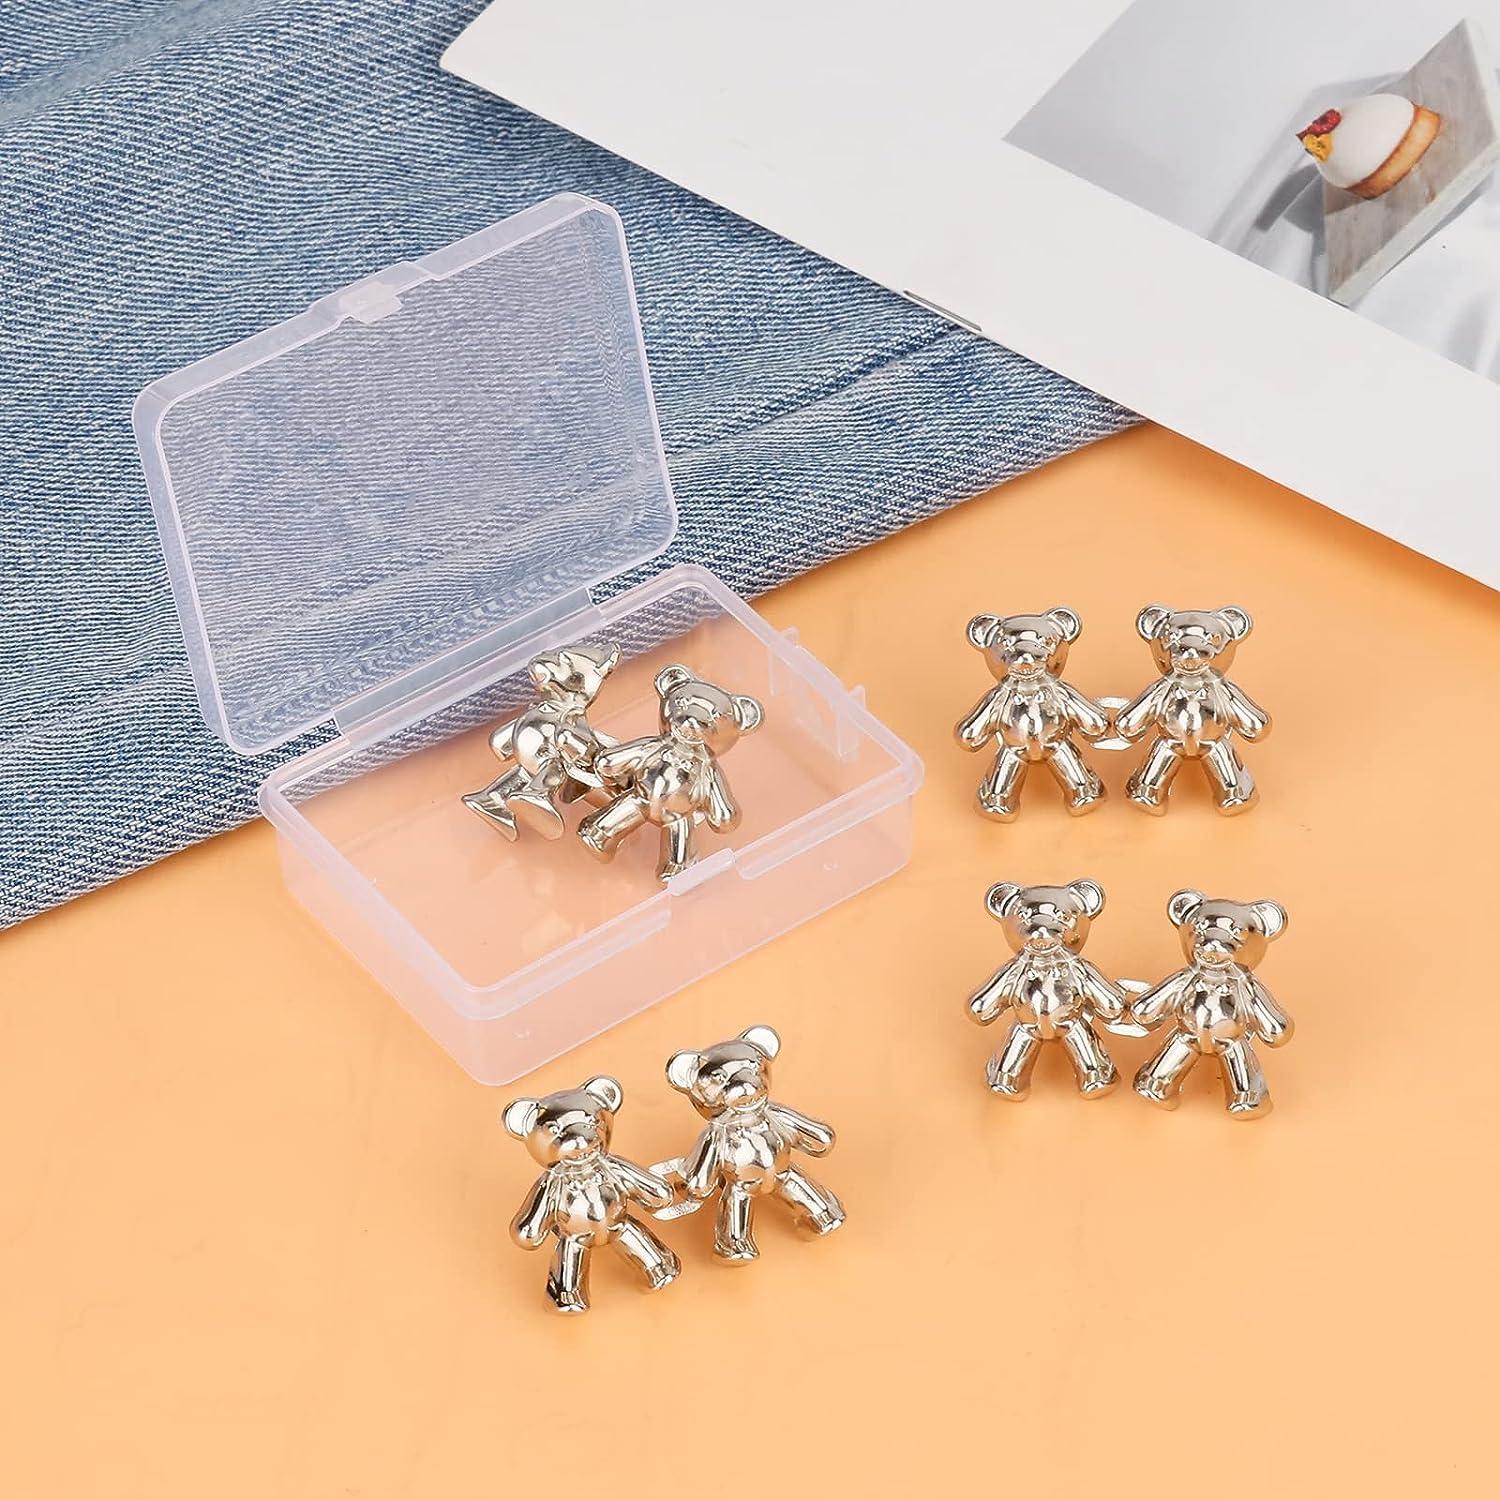  10 Set Adjustable Waist Buckles Jean Button Pants Button  Tightener Button Adjuster Pants Clips Button Pins for Loose Jeans Skirts  (Silver+Bronze)